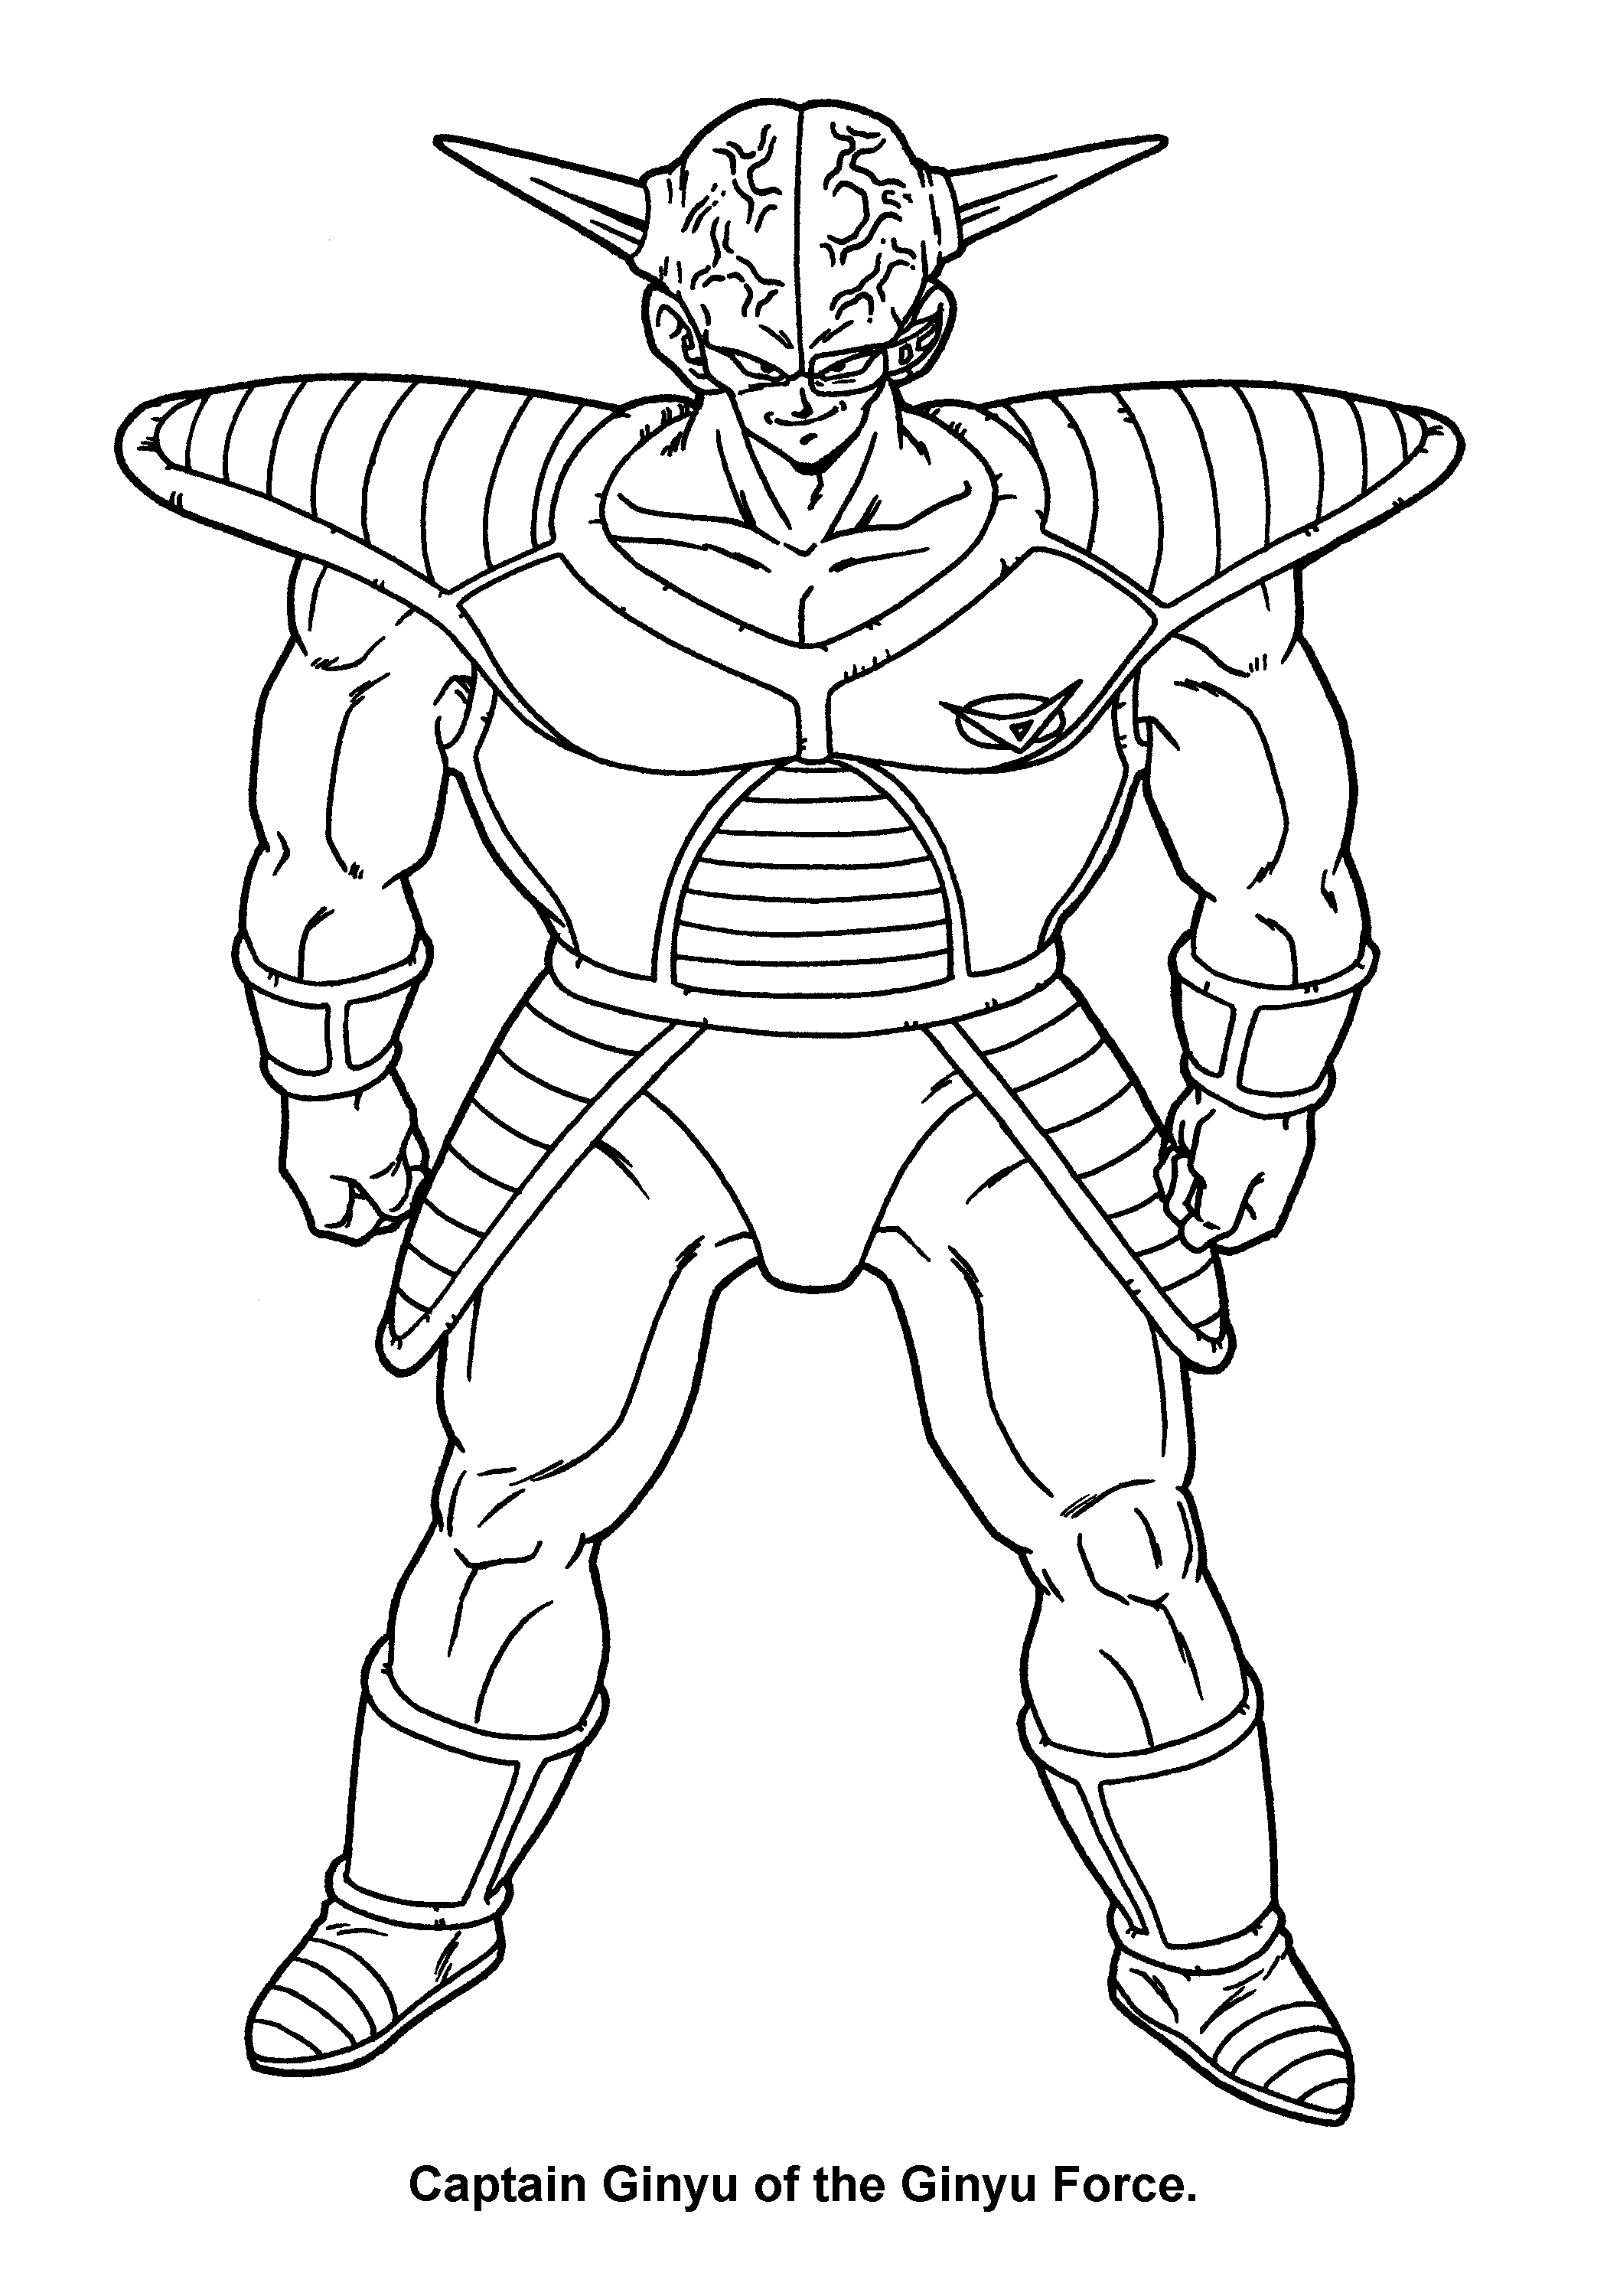 Dragon ball z Coloring Pages - Coloringpages1001.com